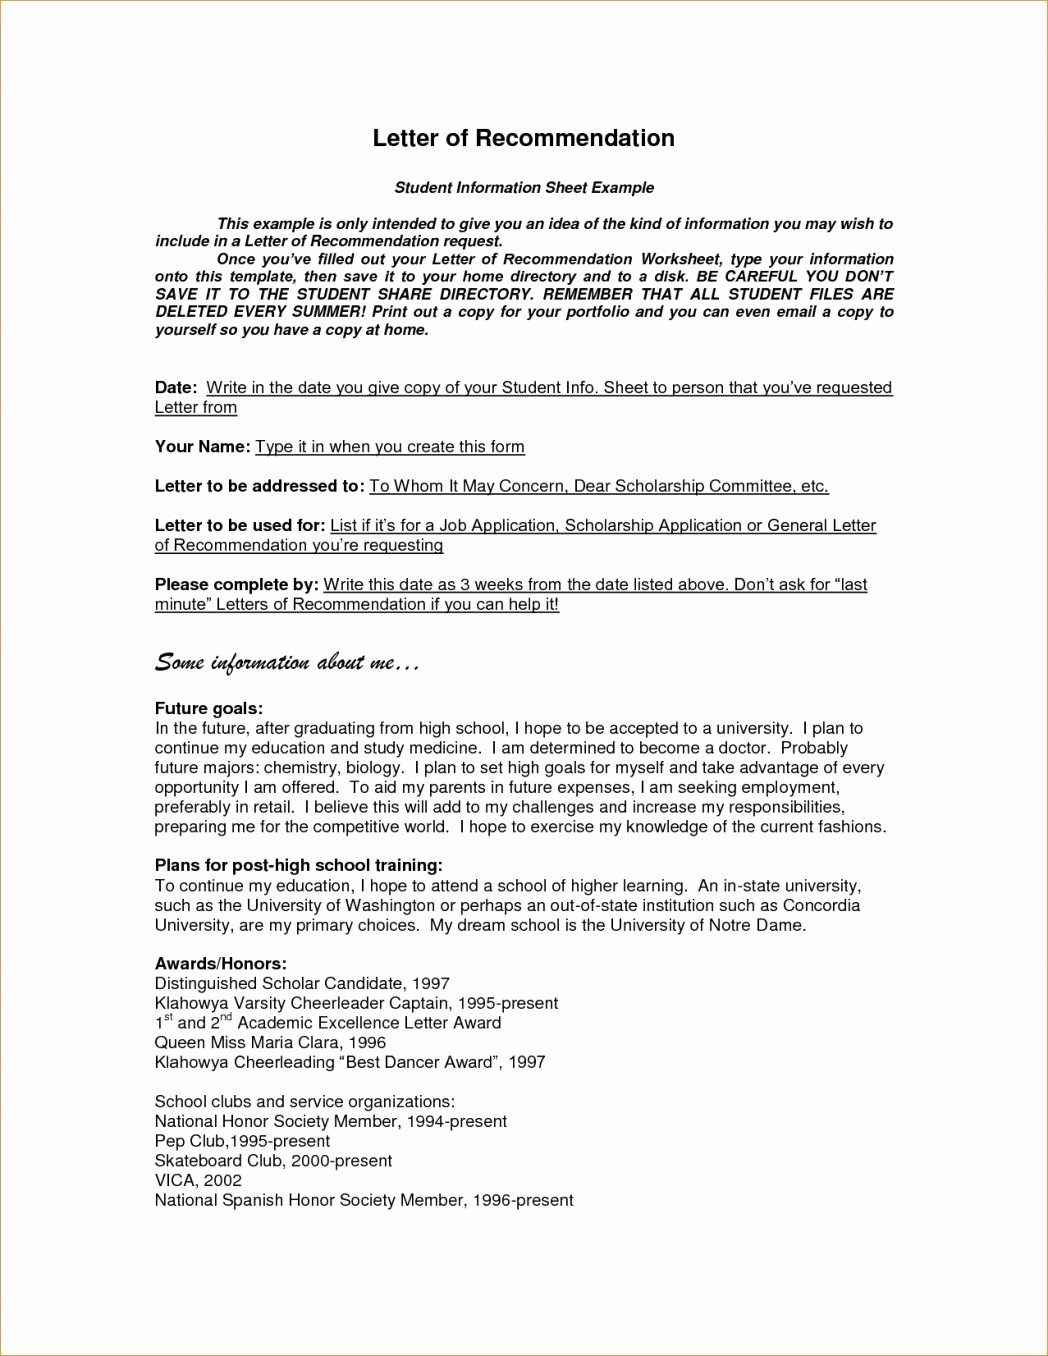 Graduated with Honors Resume Awesome 12 Letter Re Mendation for Proposal Letterhead